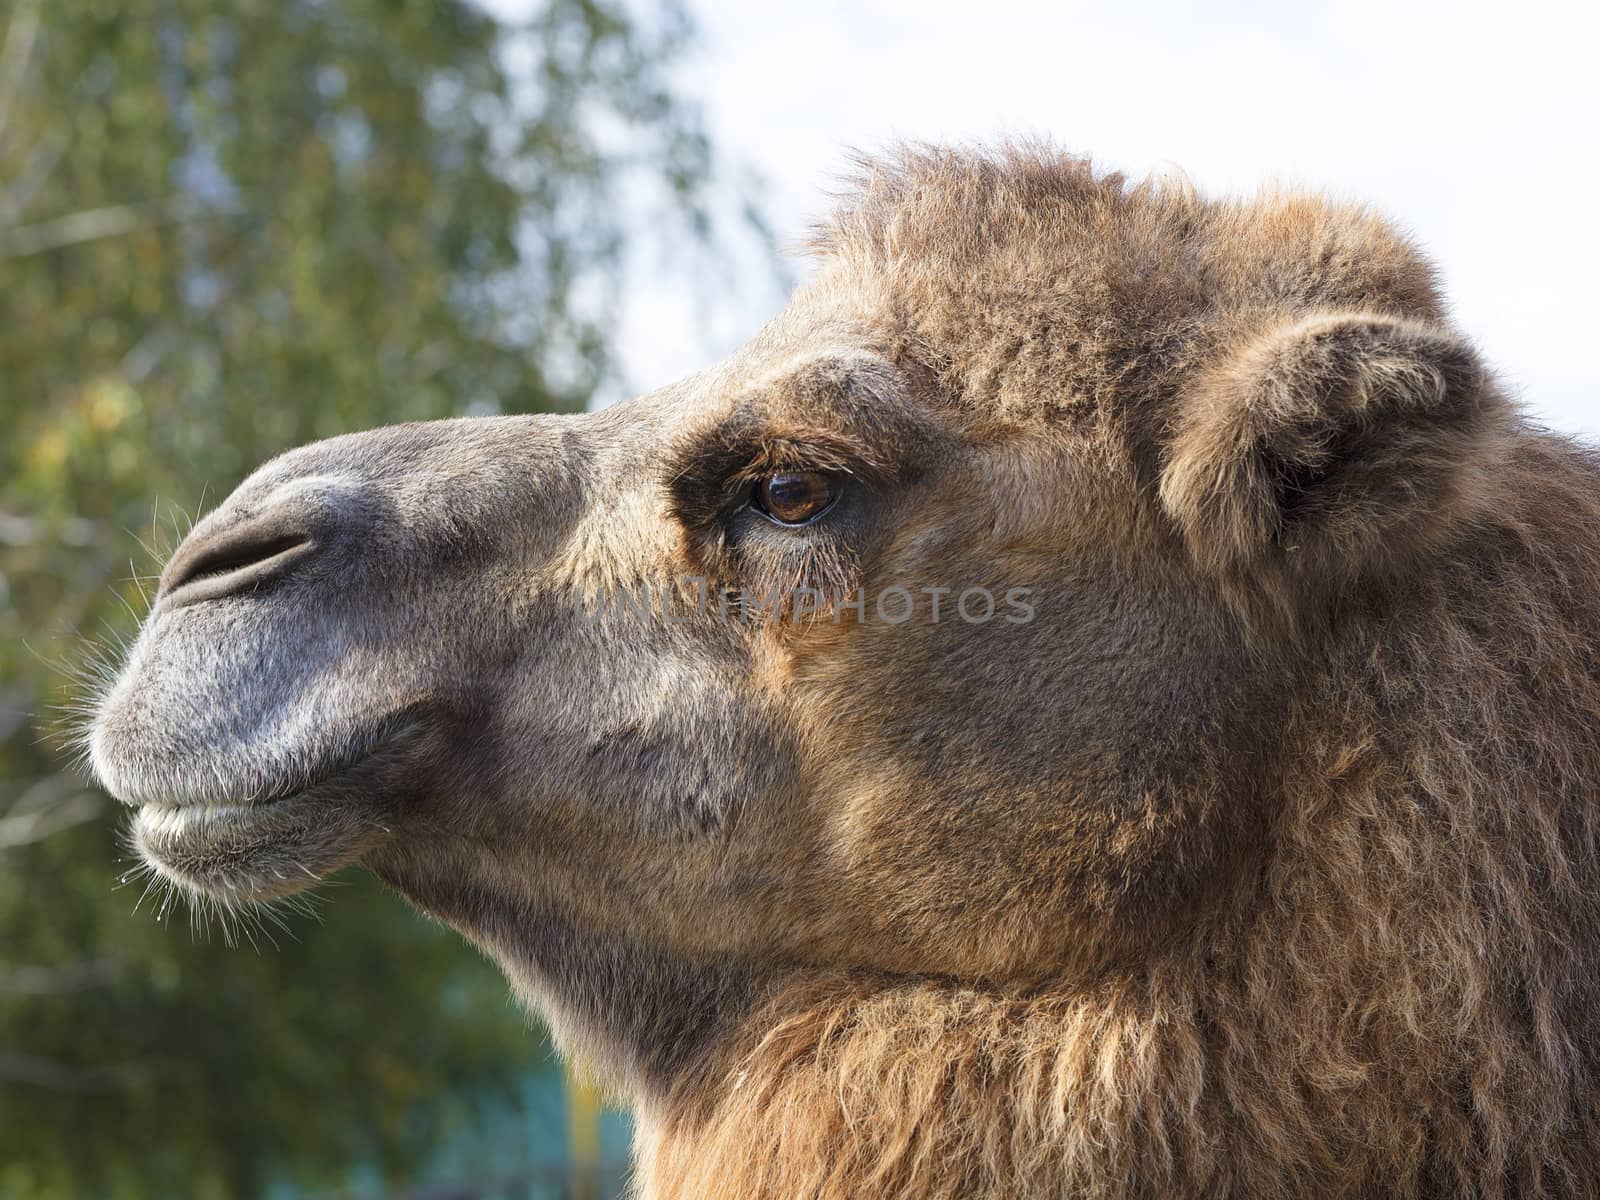 head of an adult camel in profile close-up against a green tree